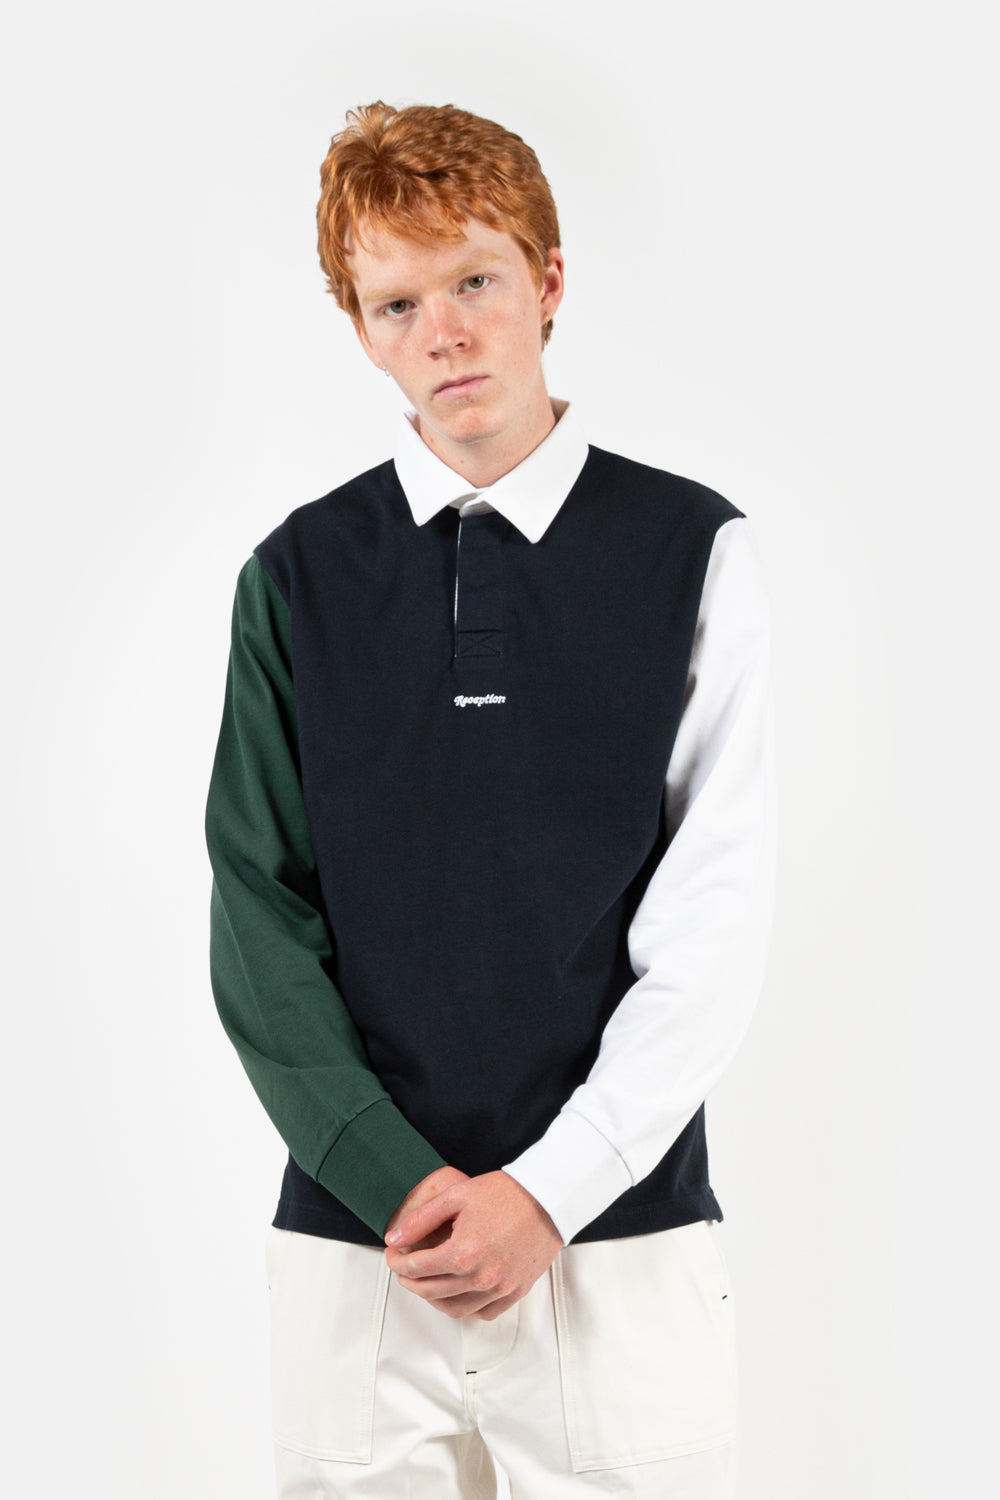 reception rugby polo shirt in color block